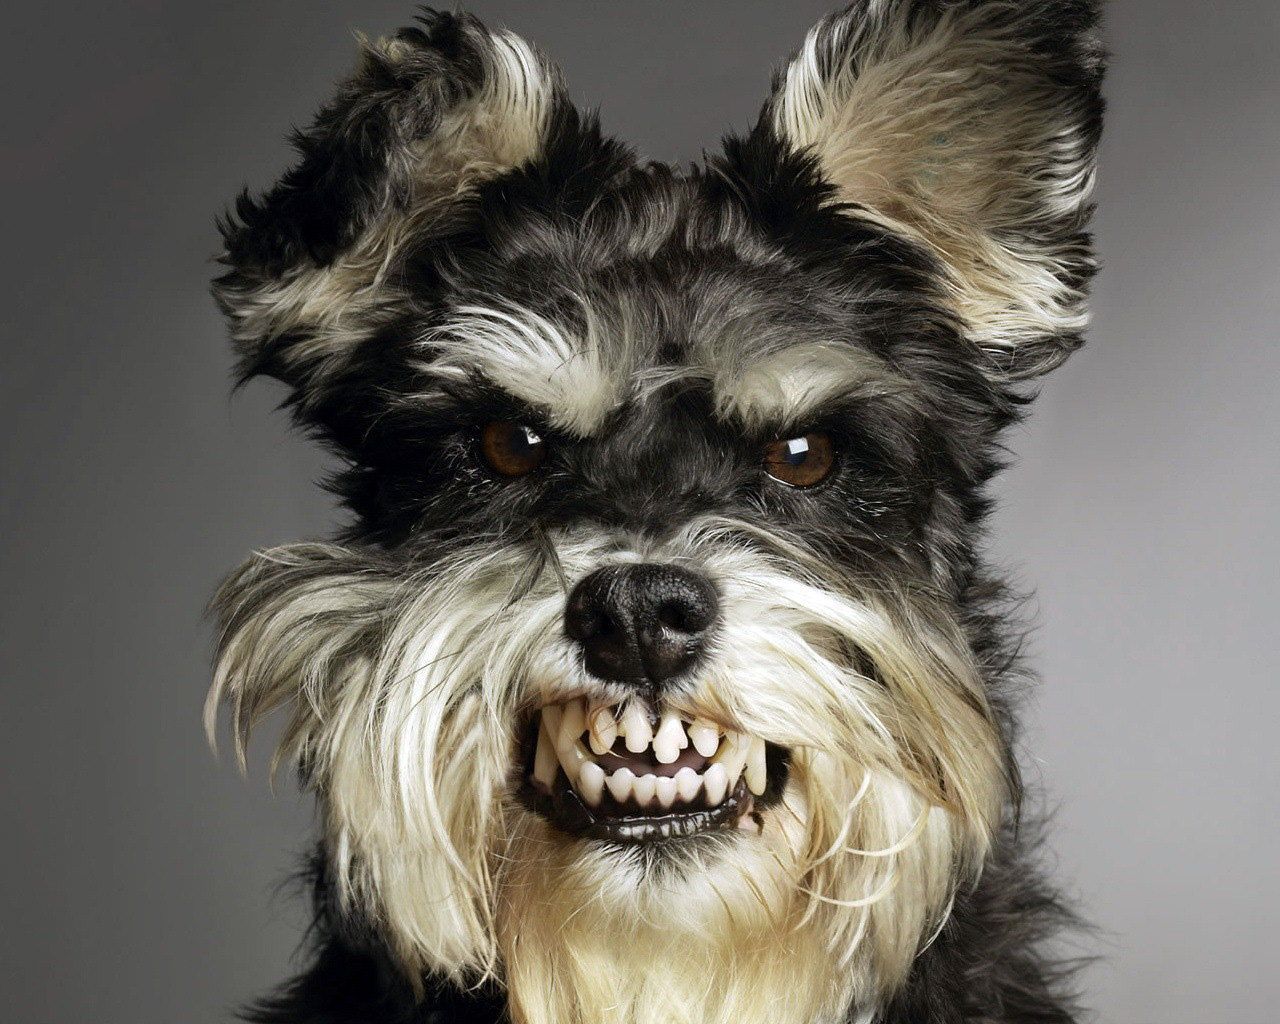 Funny Dogs Wallpaper. Funny dog picture, Smiling dogs, Angry dog